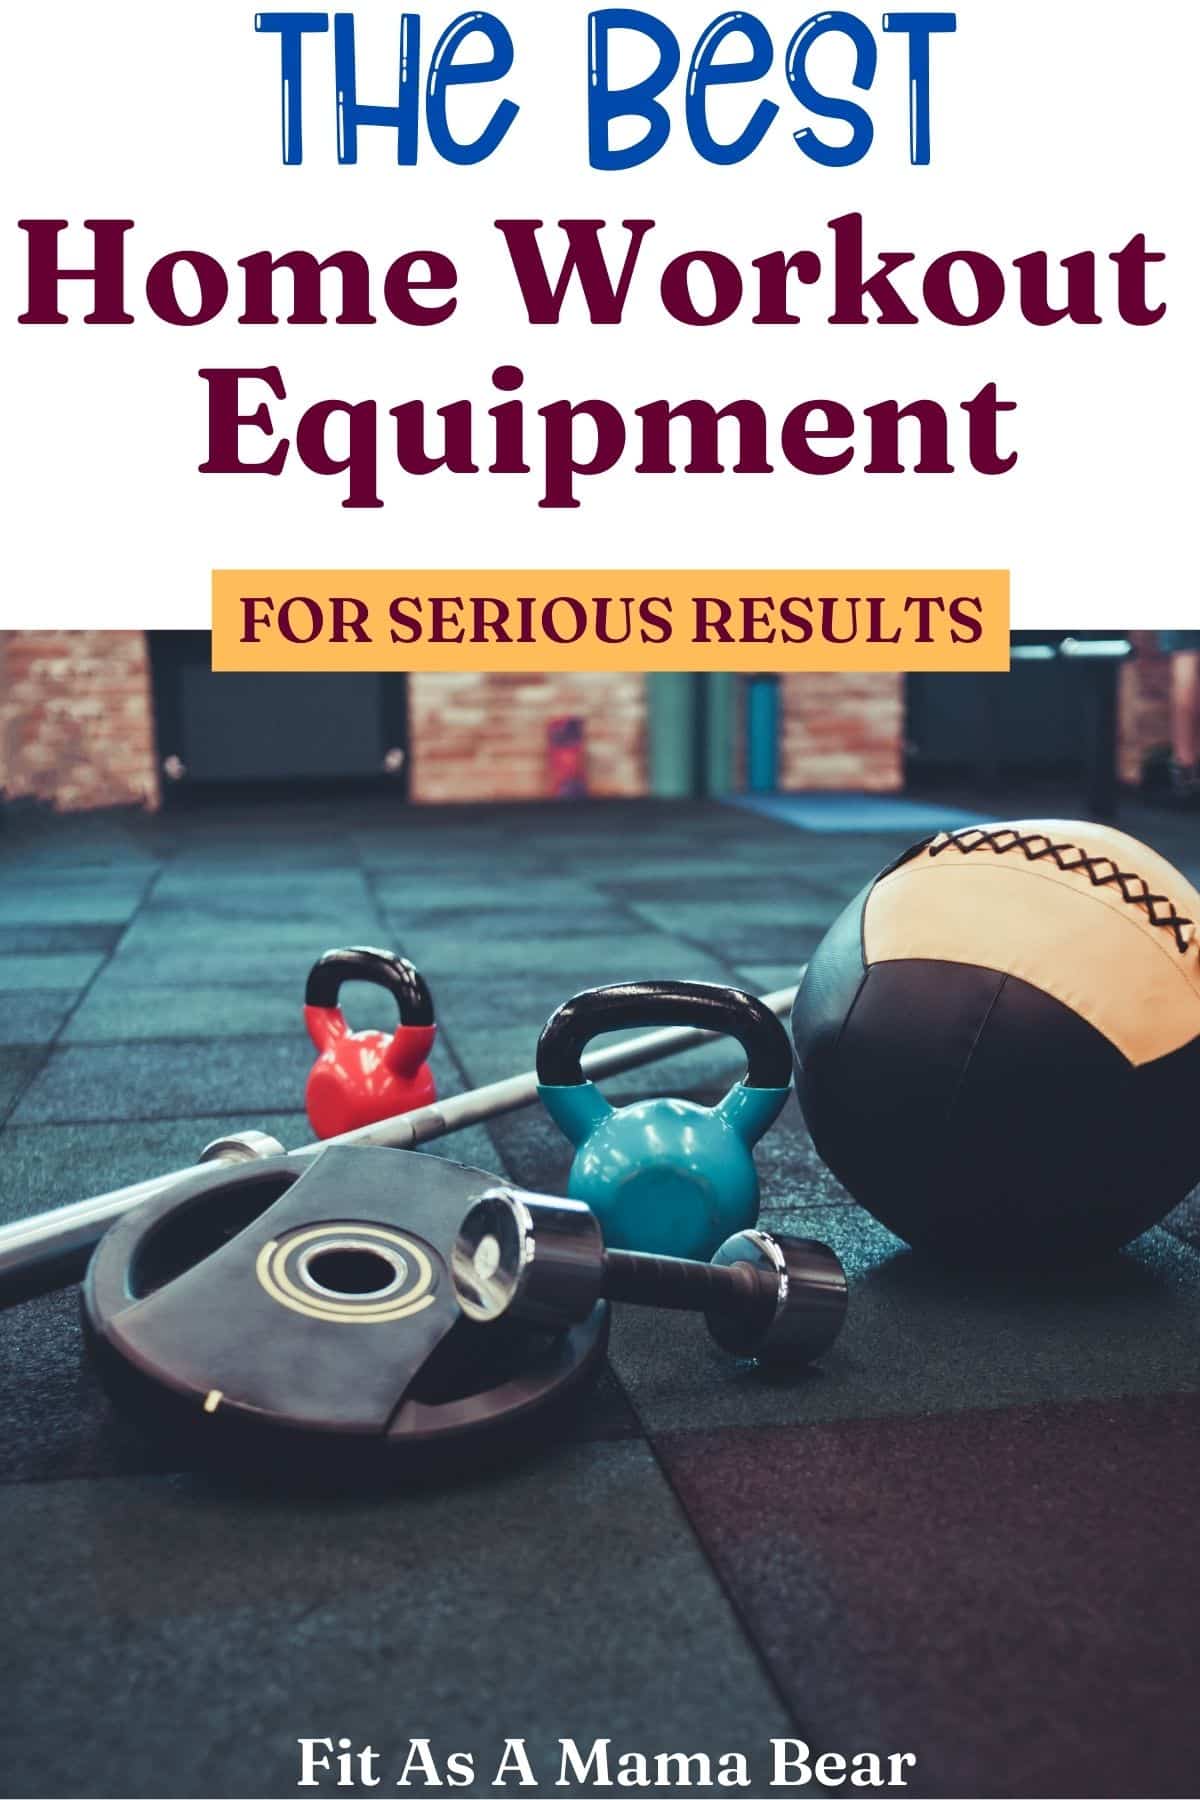 Barbell, medicine ball and workout equipment with text above the images.